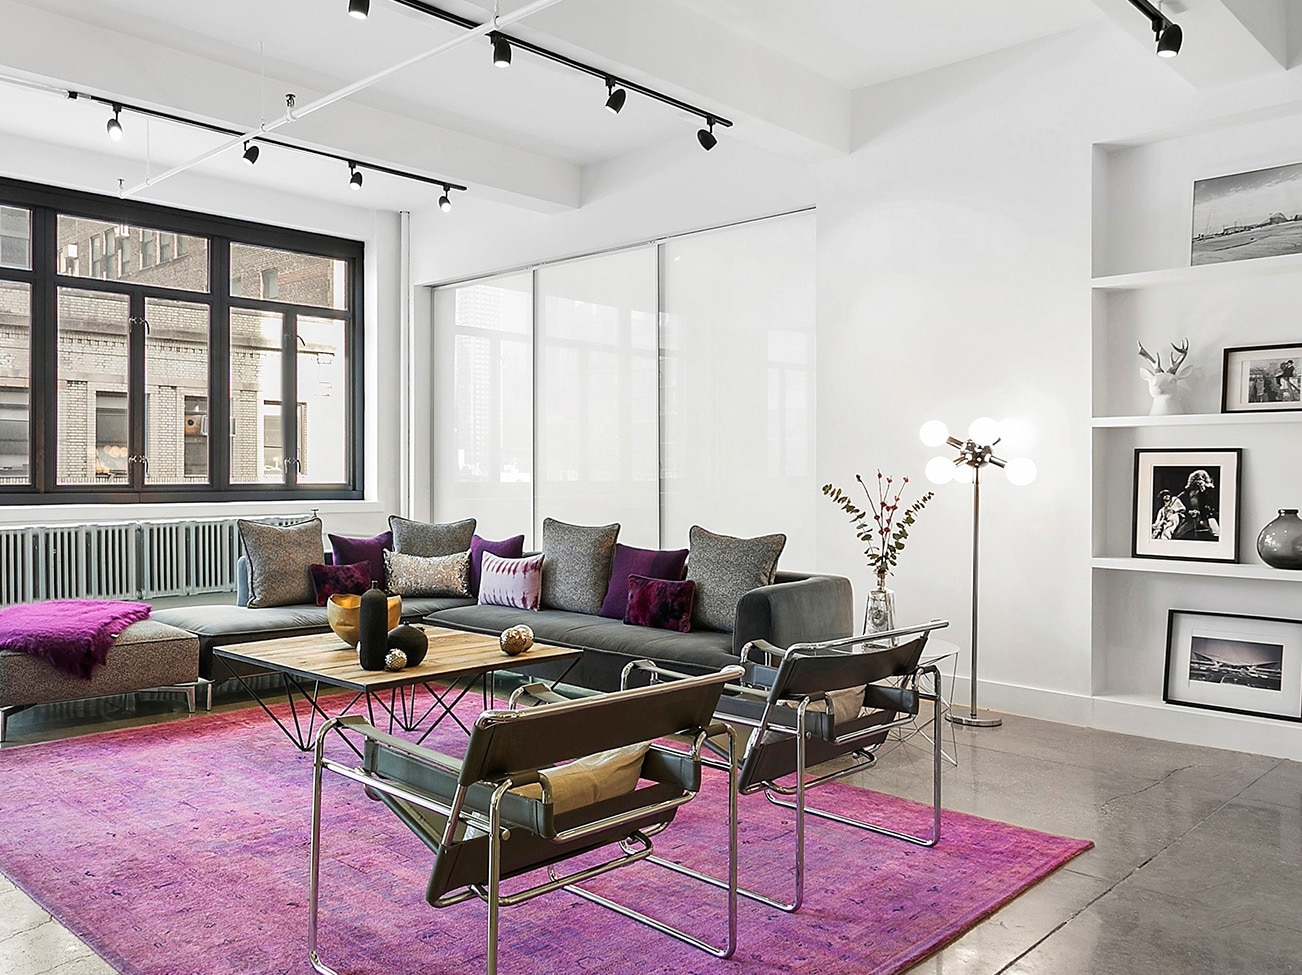 Living room, metal-framed windows, black track lighting, gray sectional, Breuer chairs and fuchsia area rug on stone floor.